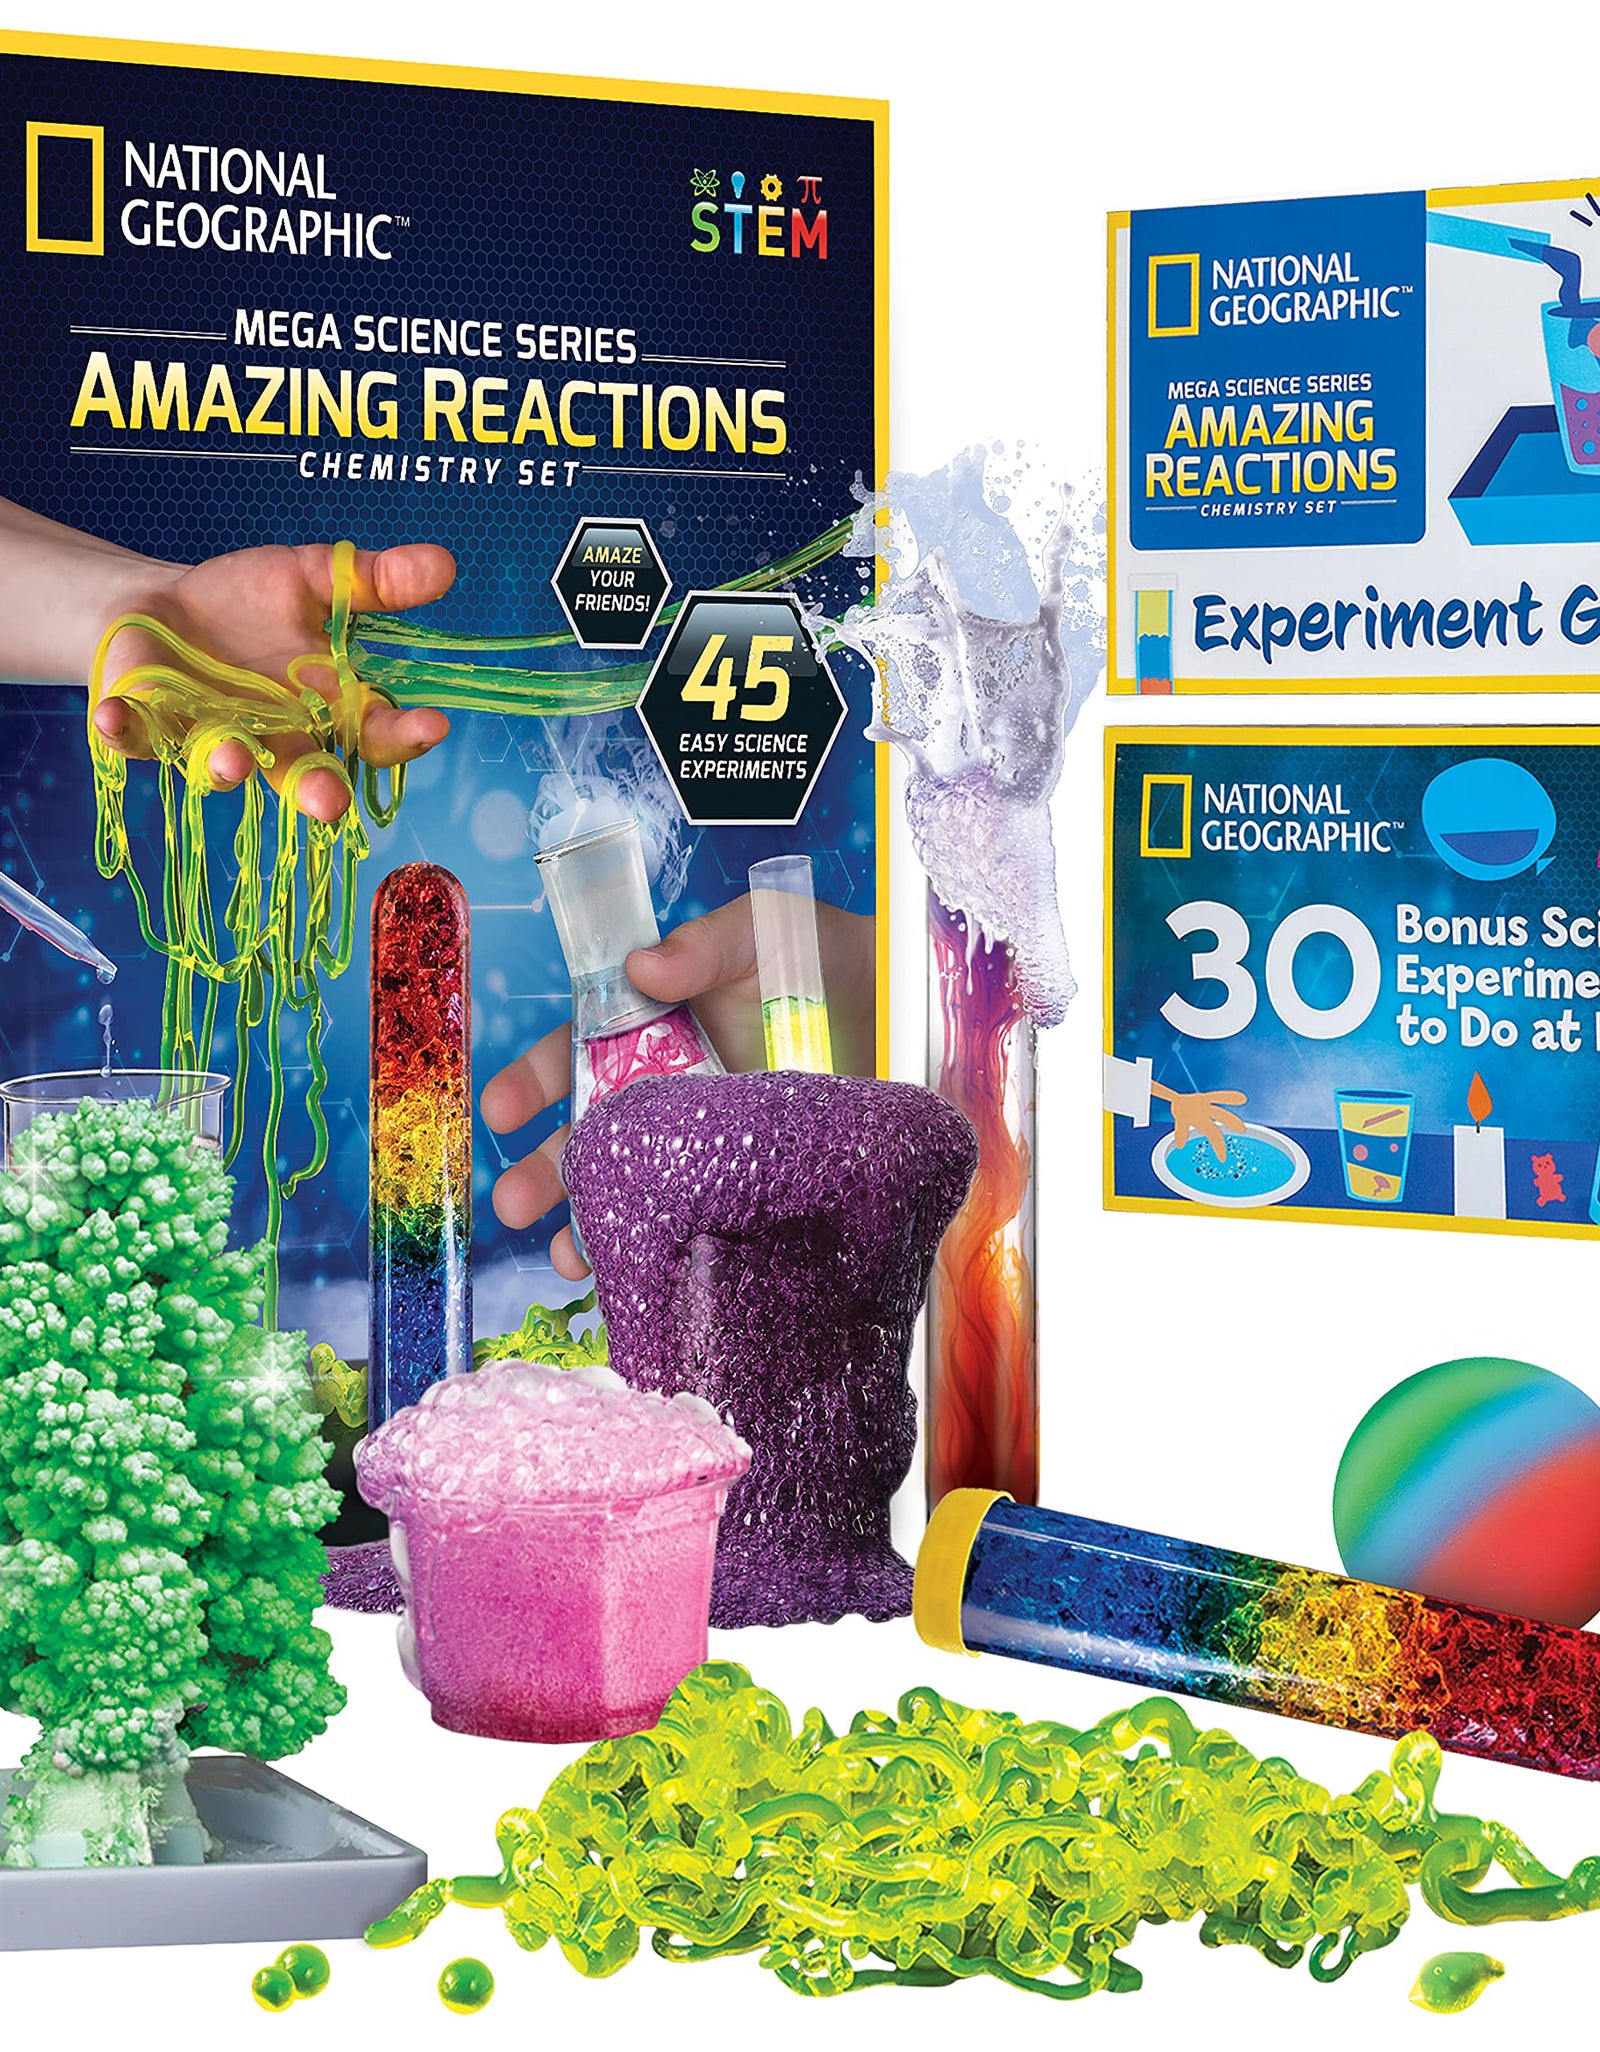 NATIONAL GEOGRAPHIC Amazing Chemistry Set - Mega Chemistry Kit with Over 15 Science Experiments, Make Glowing Worms, a Crystal Tree, Fizzy Solutions, and More, Great STEM Gift for Girls and Boys